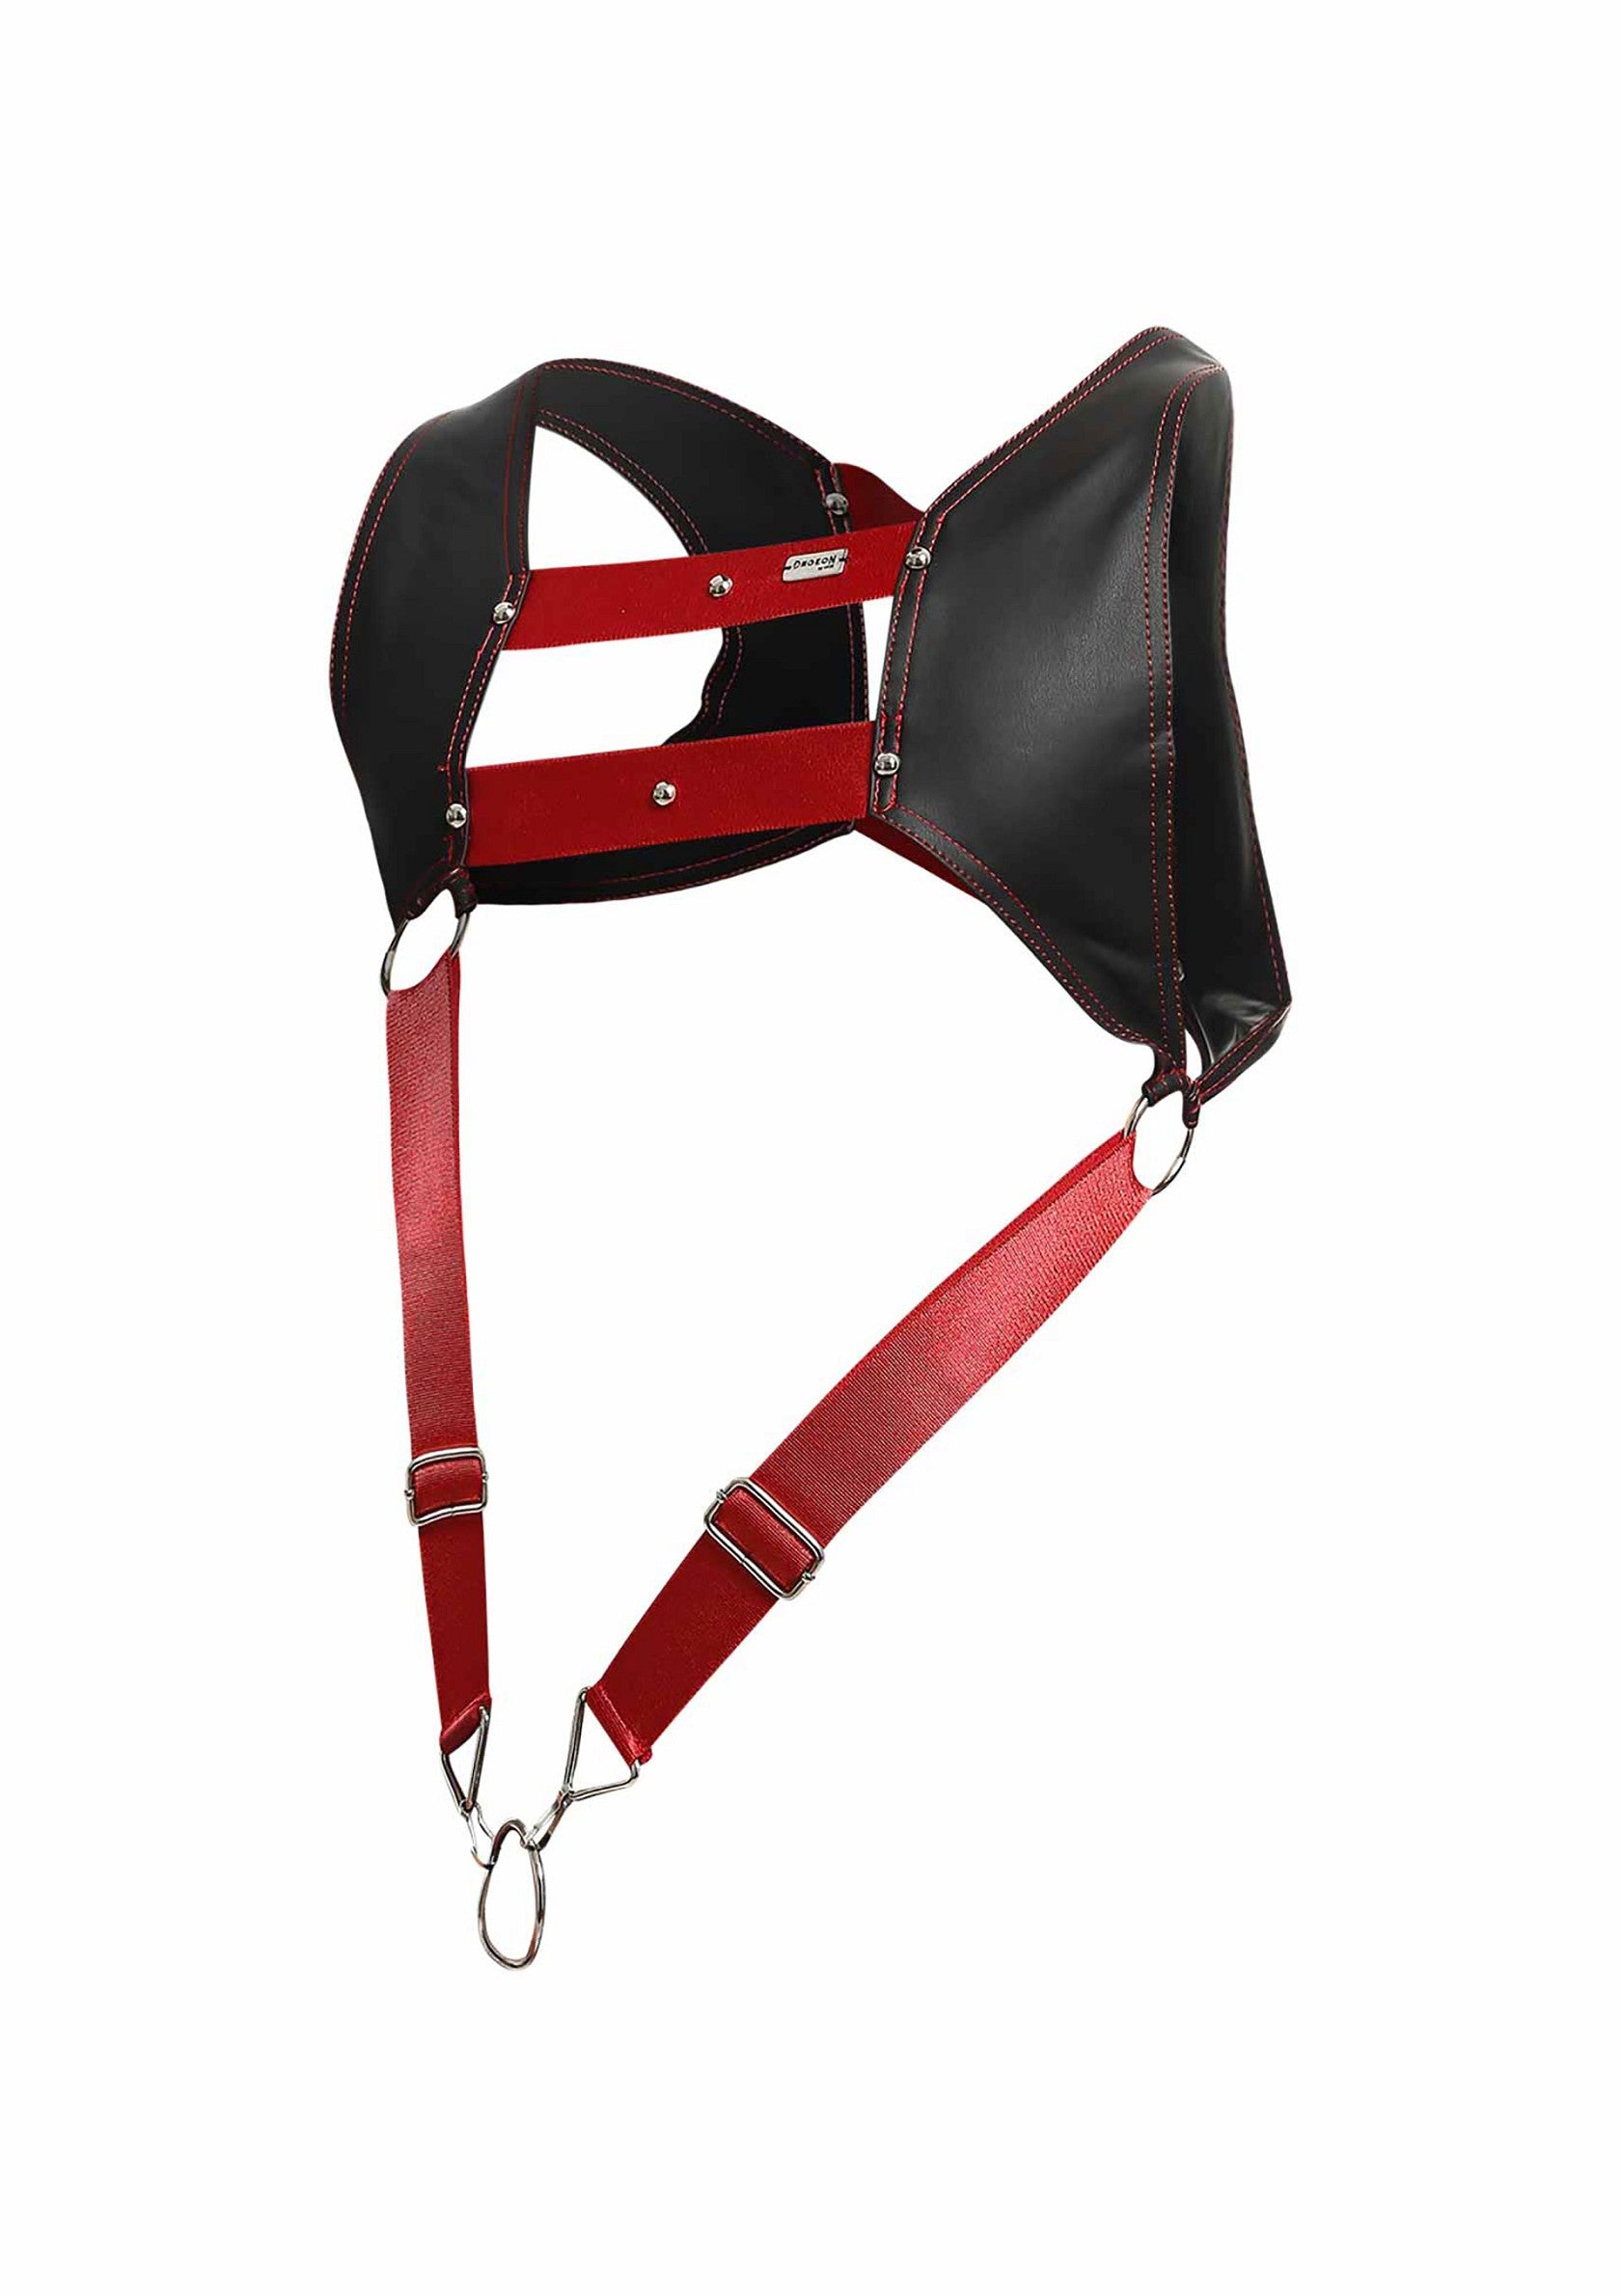 MOB Eroticwear Dngeon Top Cockring Harness RED O/S - 3